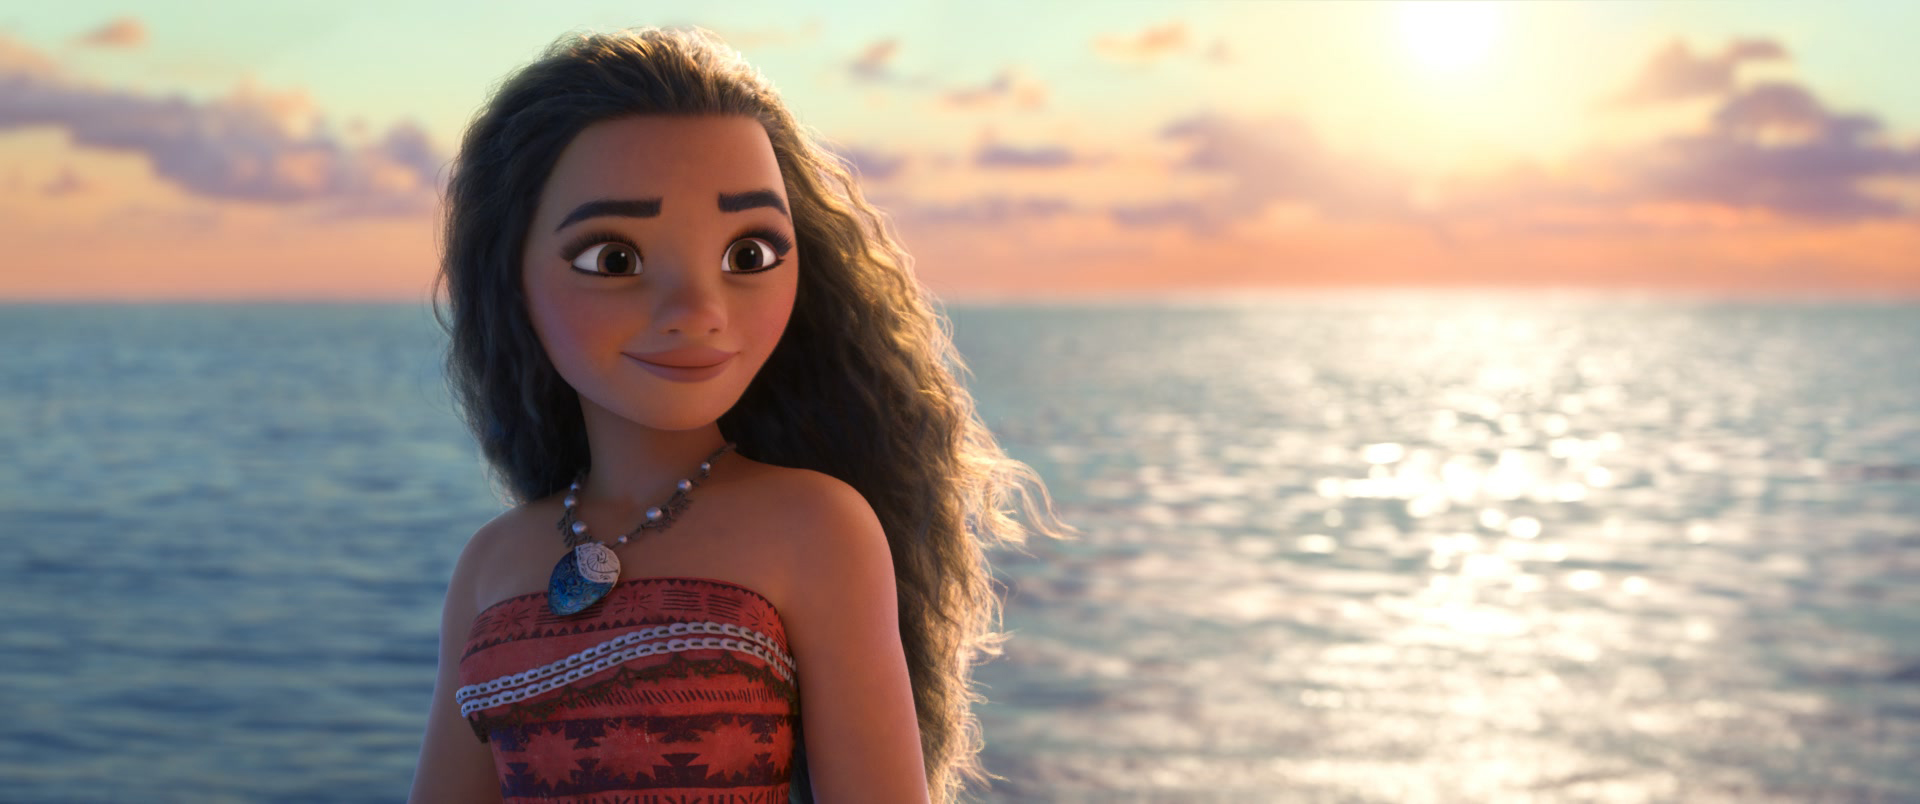 MOANA is an adventurous, tenacious and compassionate 16-year-old who sails out on a daring mission to save her people. Along the way, she discovers the one thing she's always sought: her own identity. Directed by the renowned filmmaking team of Ron Clements and John Musker (“The Little Mermaid,” “Aladdin,” “The Princess & the Frog”) and featuring newcomer Auli'I Cravalho as the voice of Moana, Walt Disney Animation Studios' “Moana” sails into U.S. theaters on Nov. 23, 2016. ©2016 Disney. All Rights Reserved.